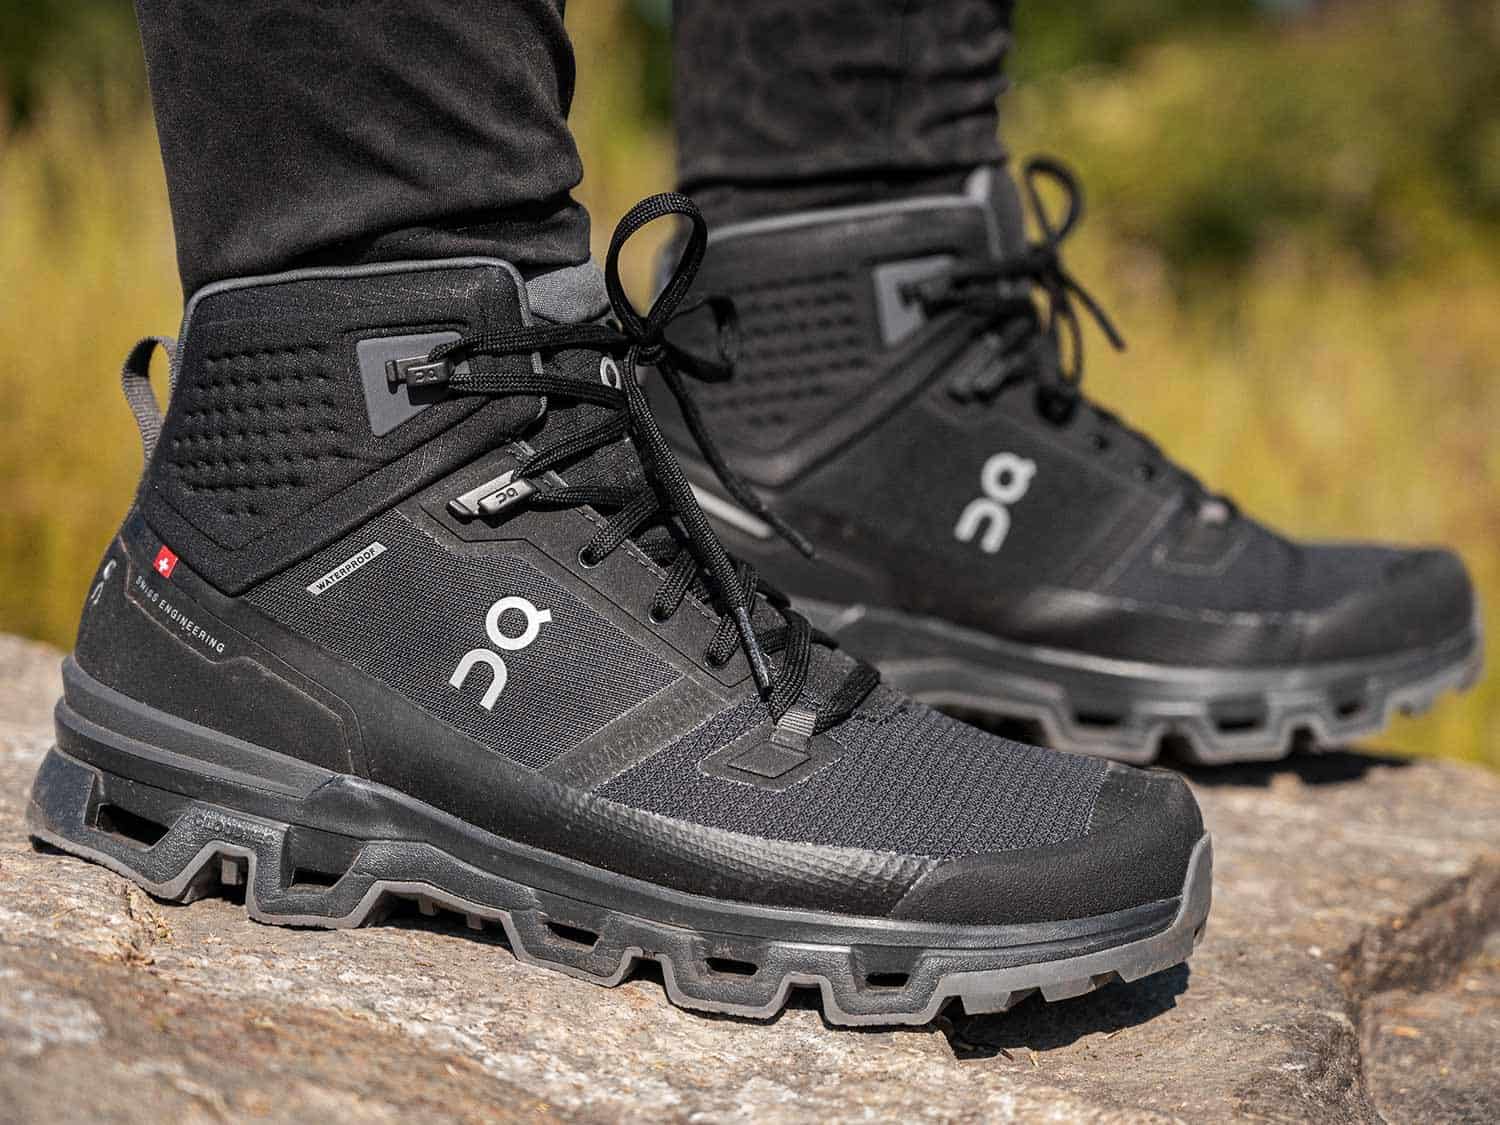 on cloudrock 2 hiking boots black